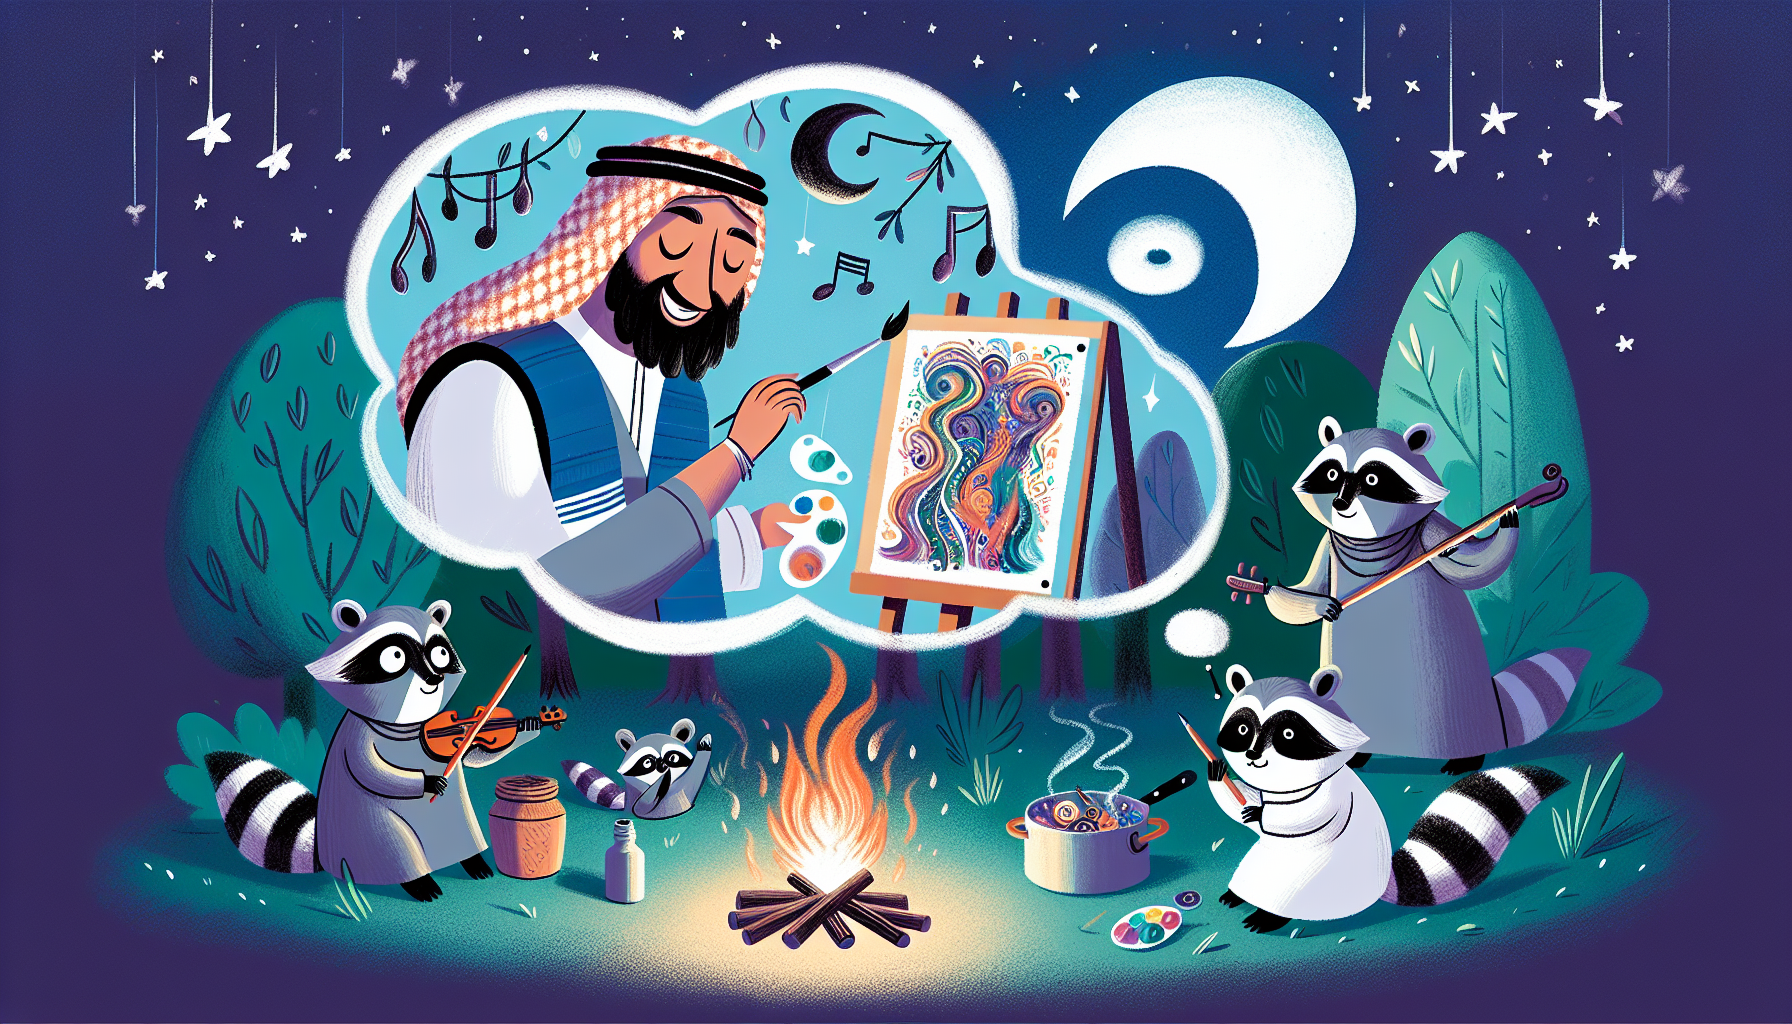 A whimsical scene depicting a person asleep under a starry sky, dreaming of raccoons performing various human activities like painting, cooking, and playing musical instruments around a glowing, magic